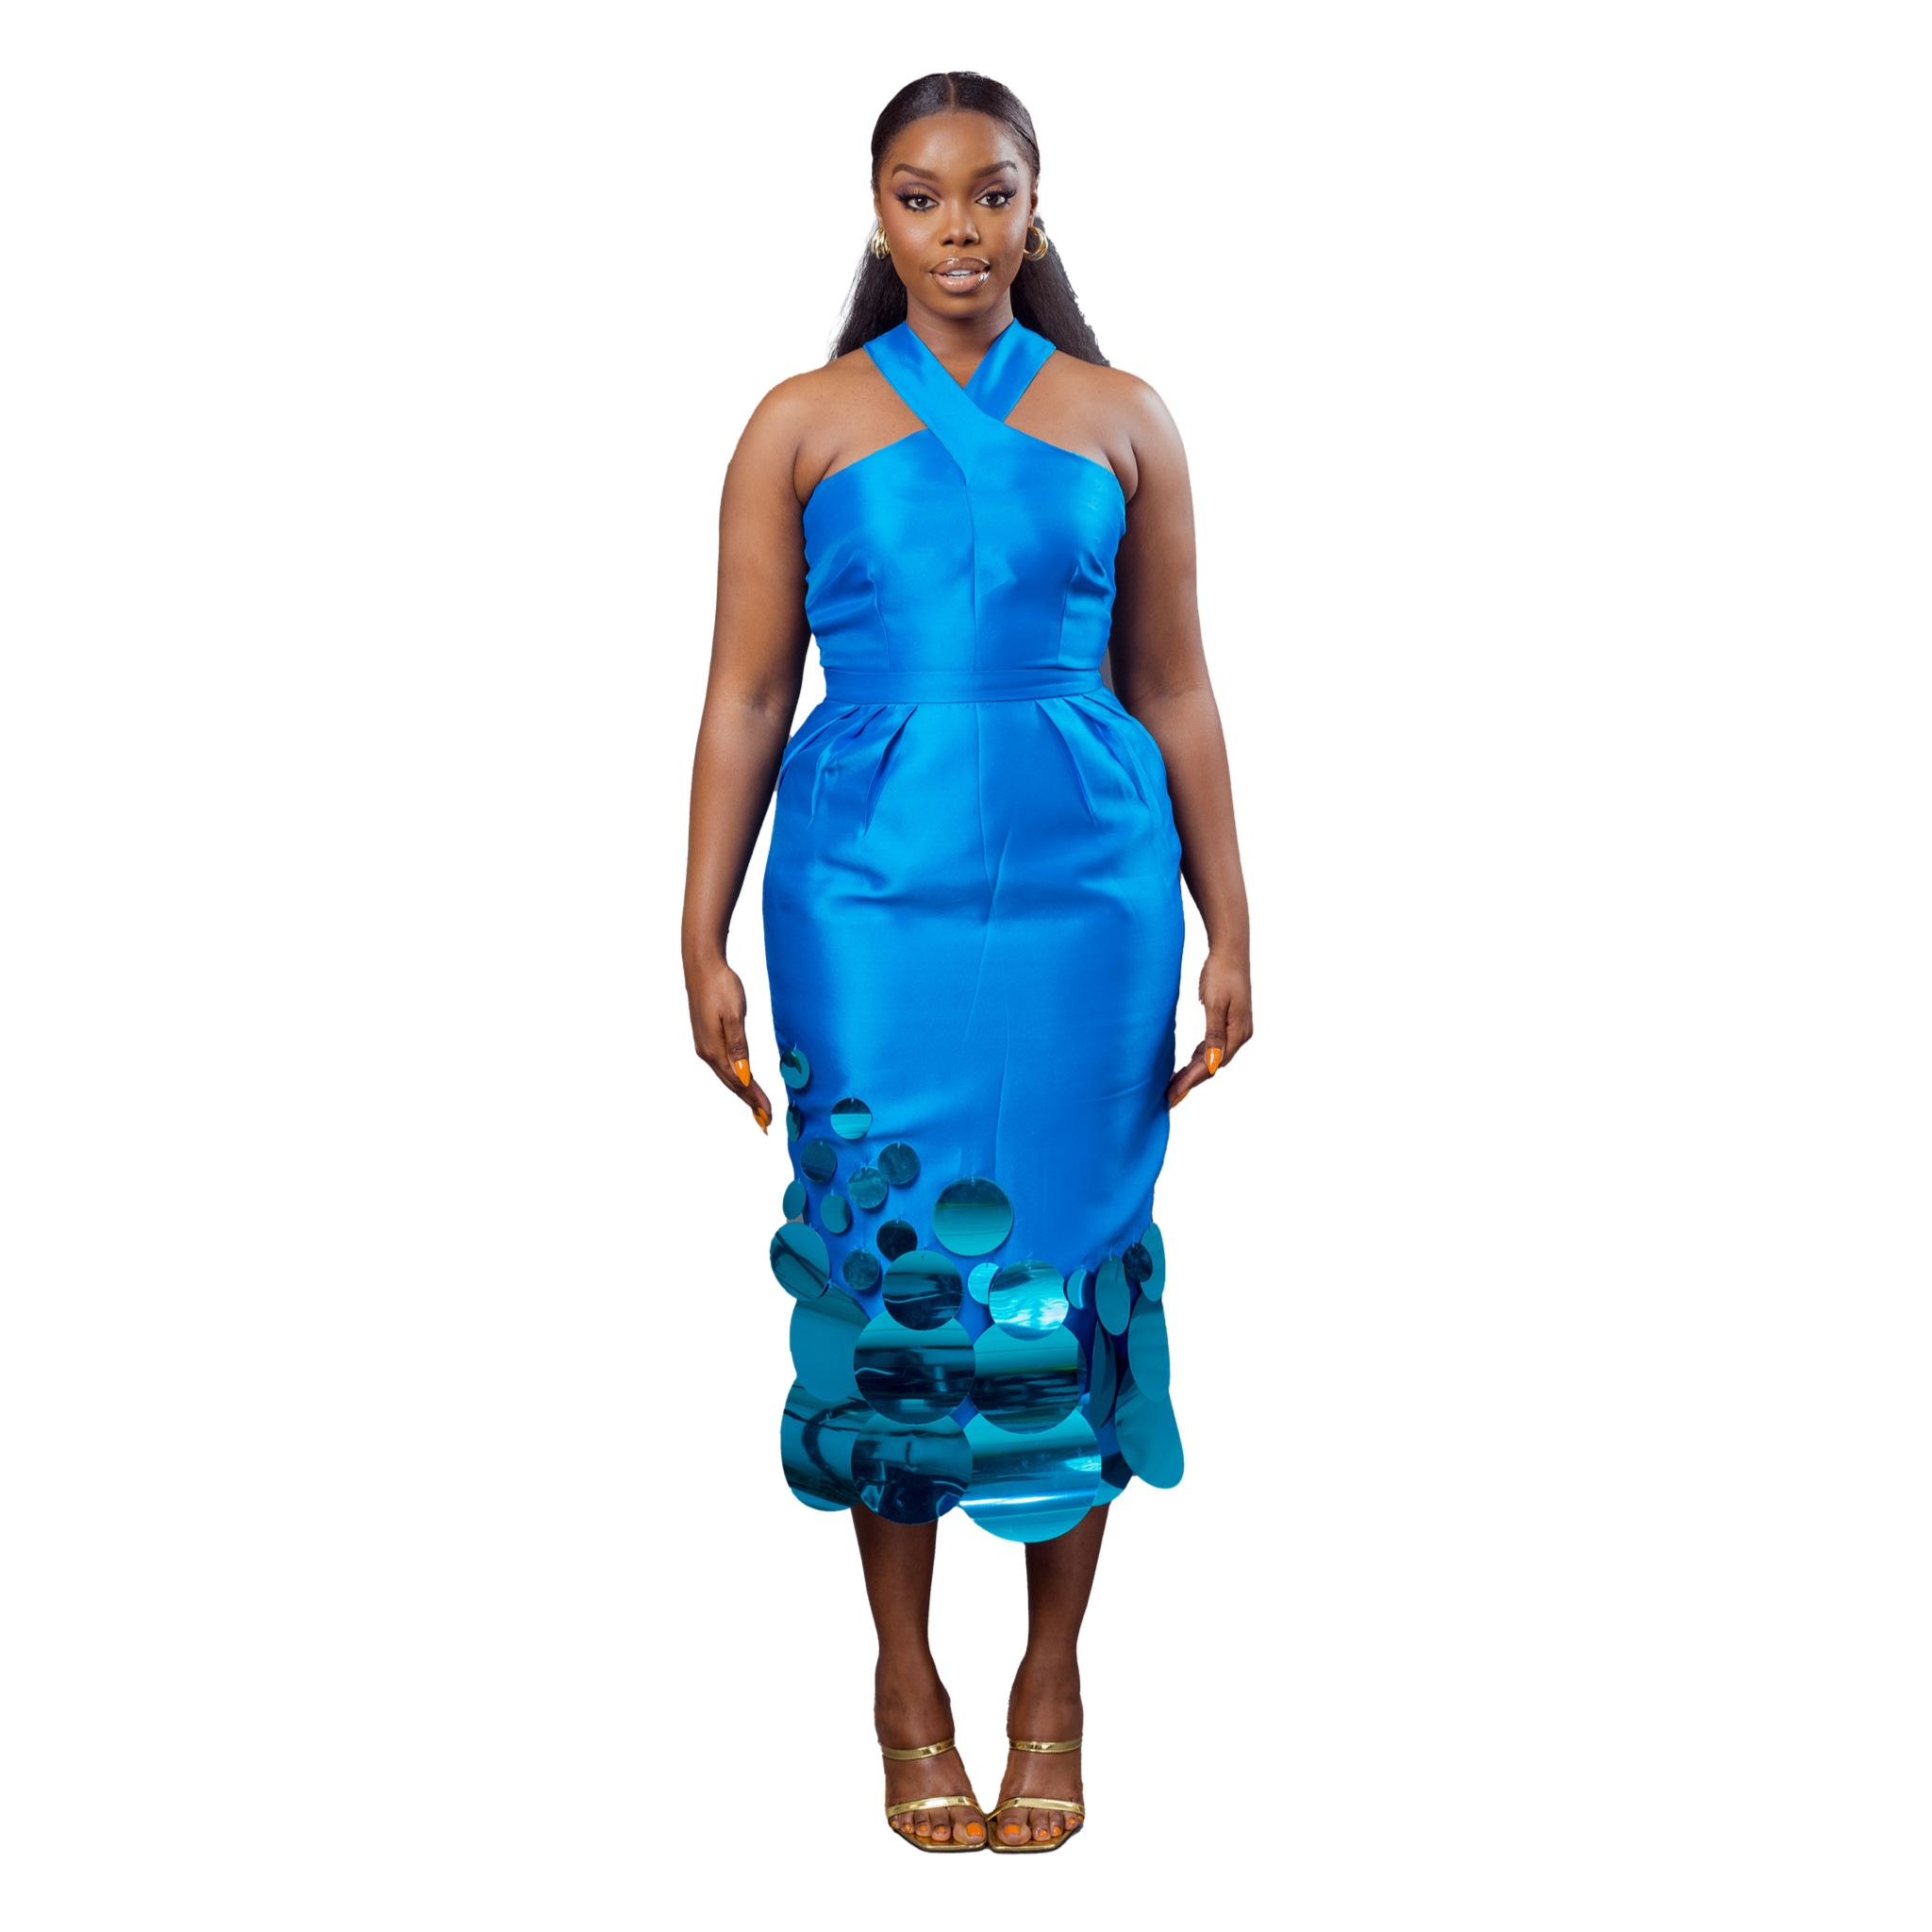 A model wearing a Turquoise top with criss-cross neckline and a Turquoise midi skirt with pleat details at the waist and sequins embellishment